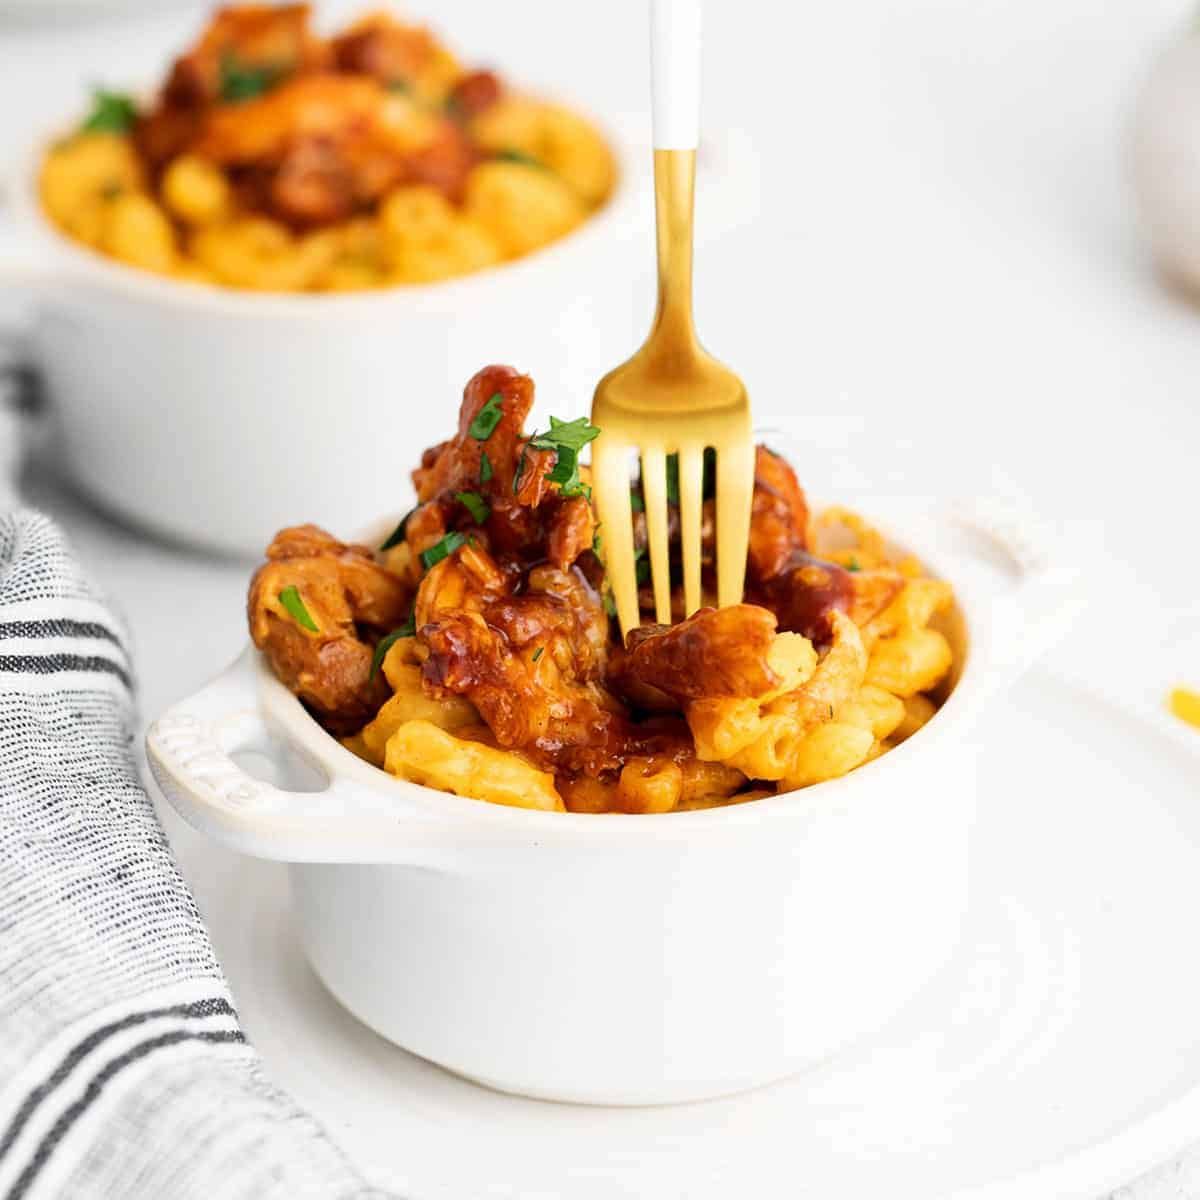 Bbq Chicken Chicken Mac & Cheese Bowl Fam Meal 6-8 Servings